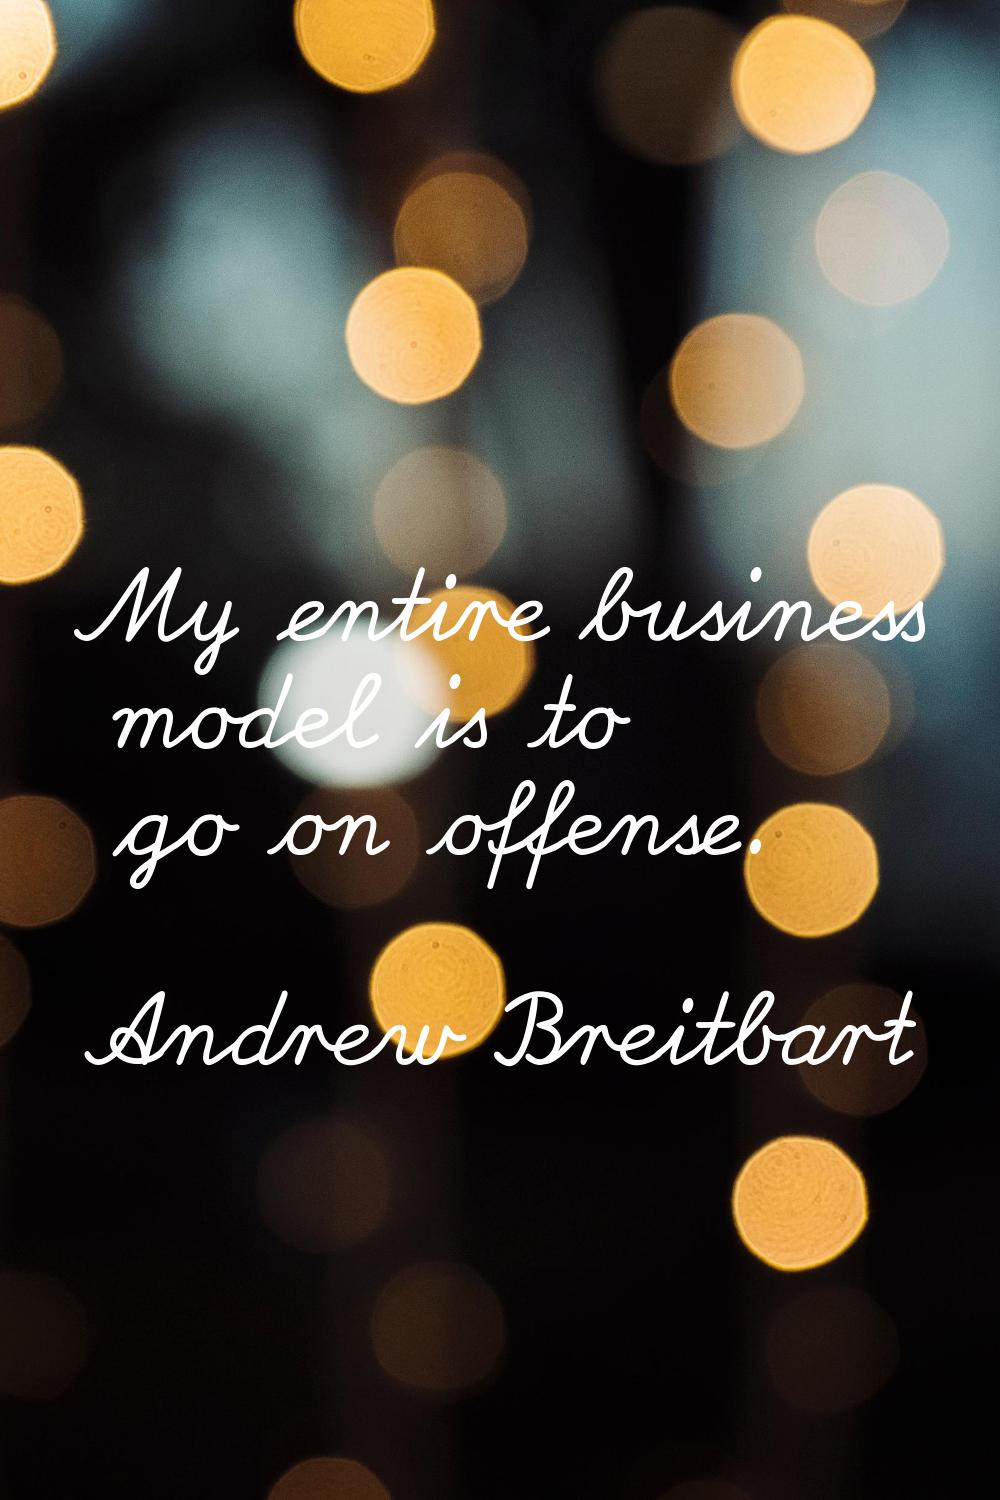 My entire business model is to go on offense.